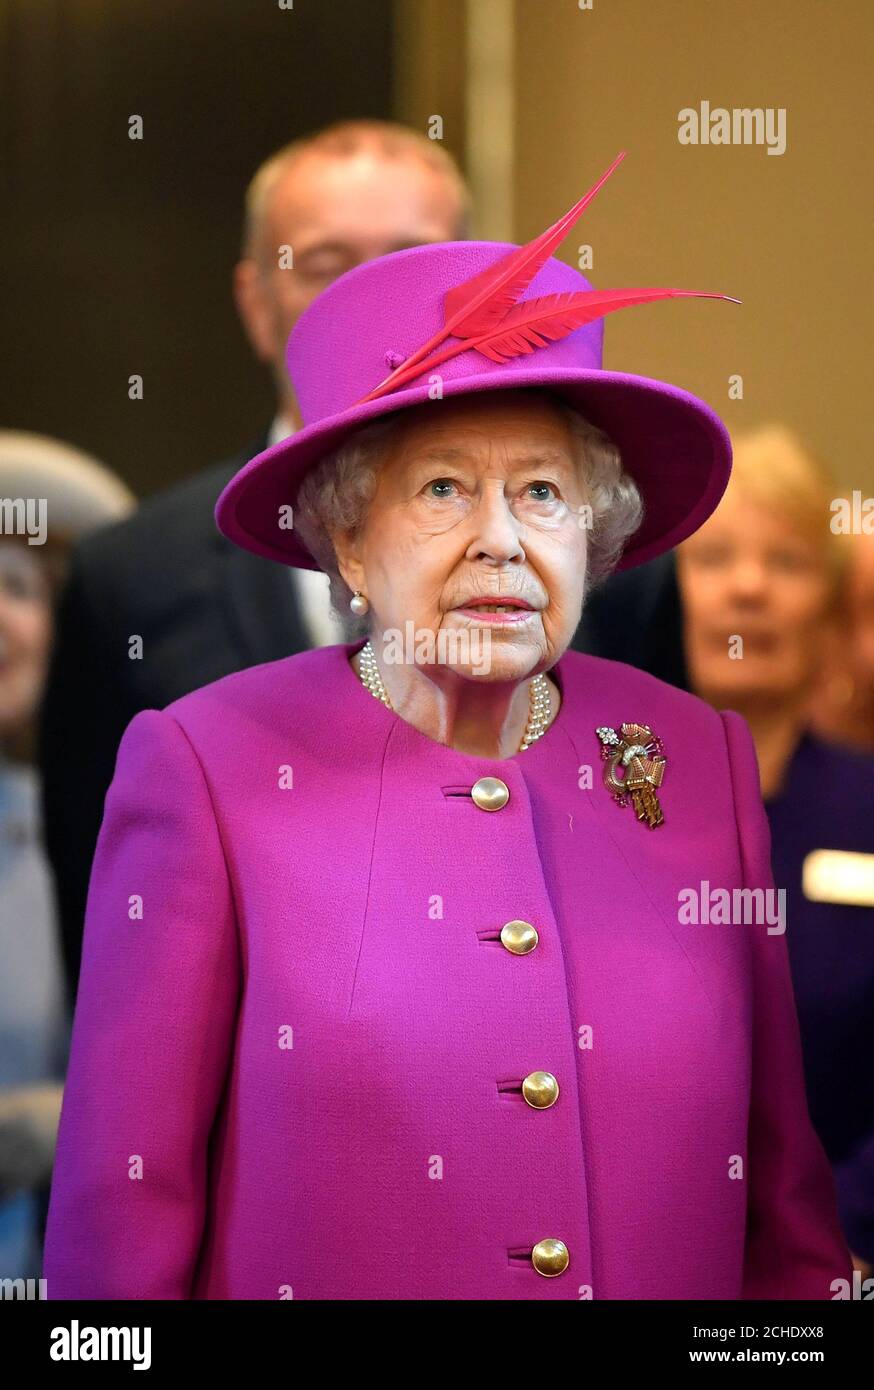 Queen Elizabeth II, during a visit to The Honourable Society of Lincoln's Inn in London to officially open its new teaching facility, the Ashworth Centre and relaunch its recently renovated Great Hall. Stock Photo